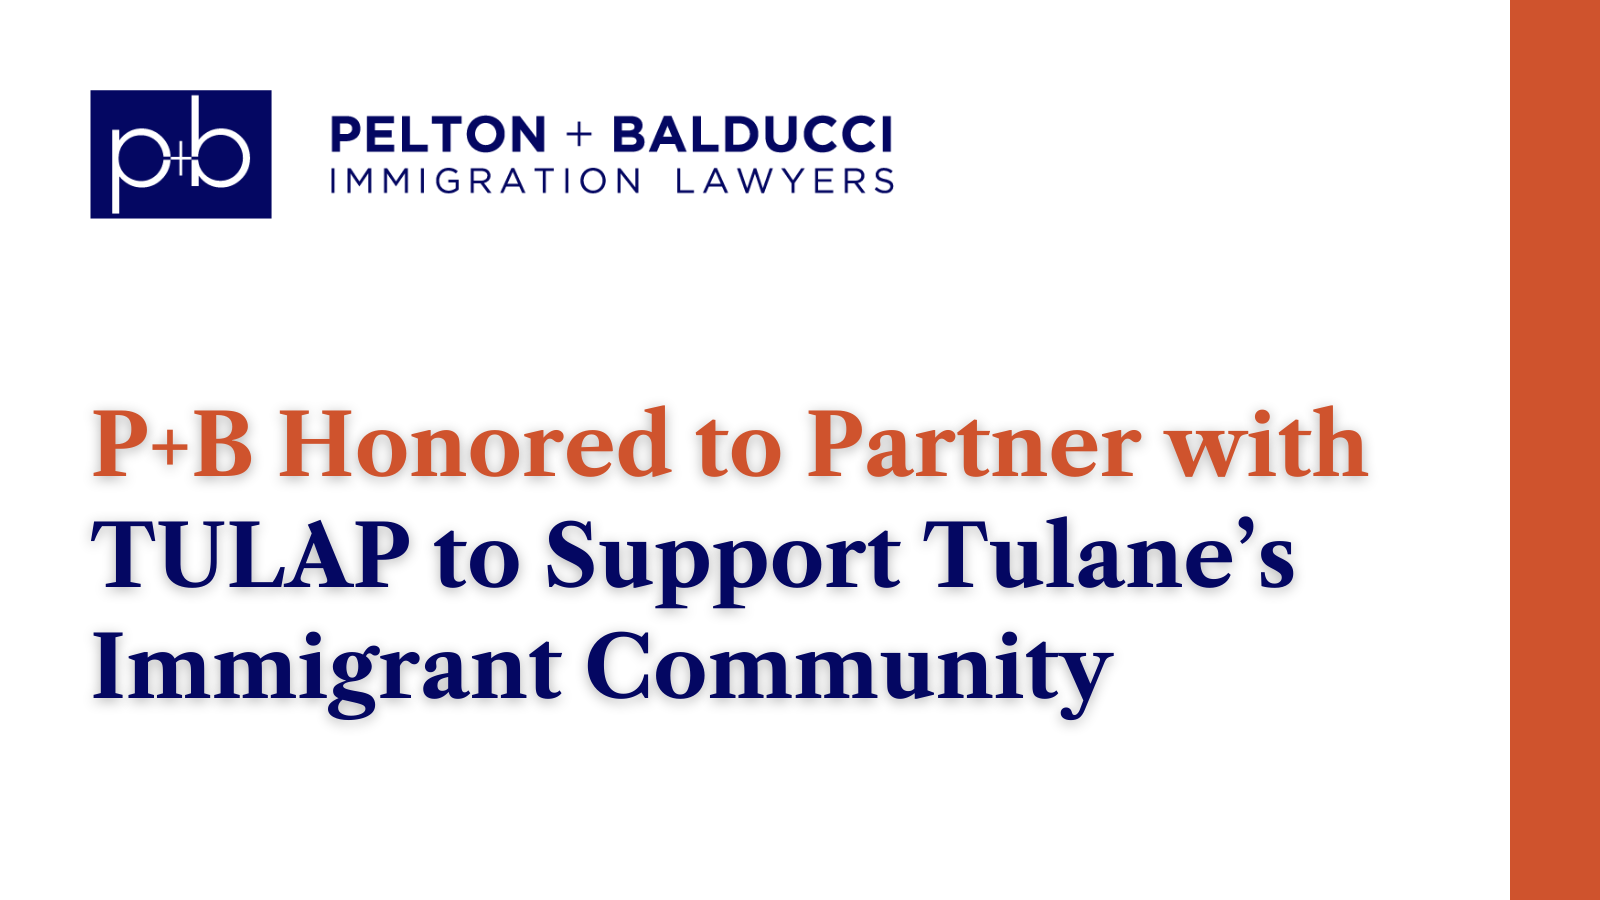 TULAP to Support Tulane’s Immigrant Community - New Orleans Immigration Lawyers - Pelton Balducci